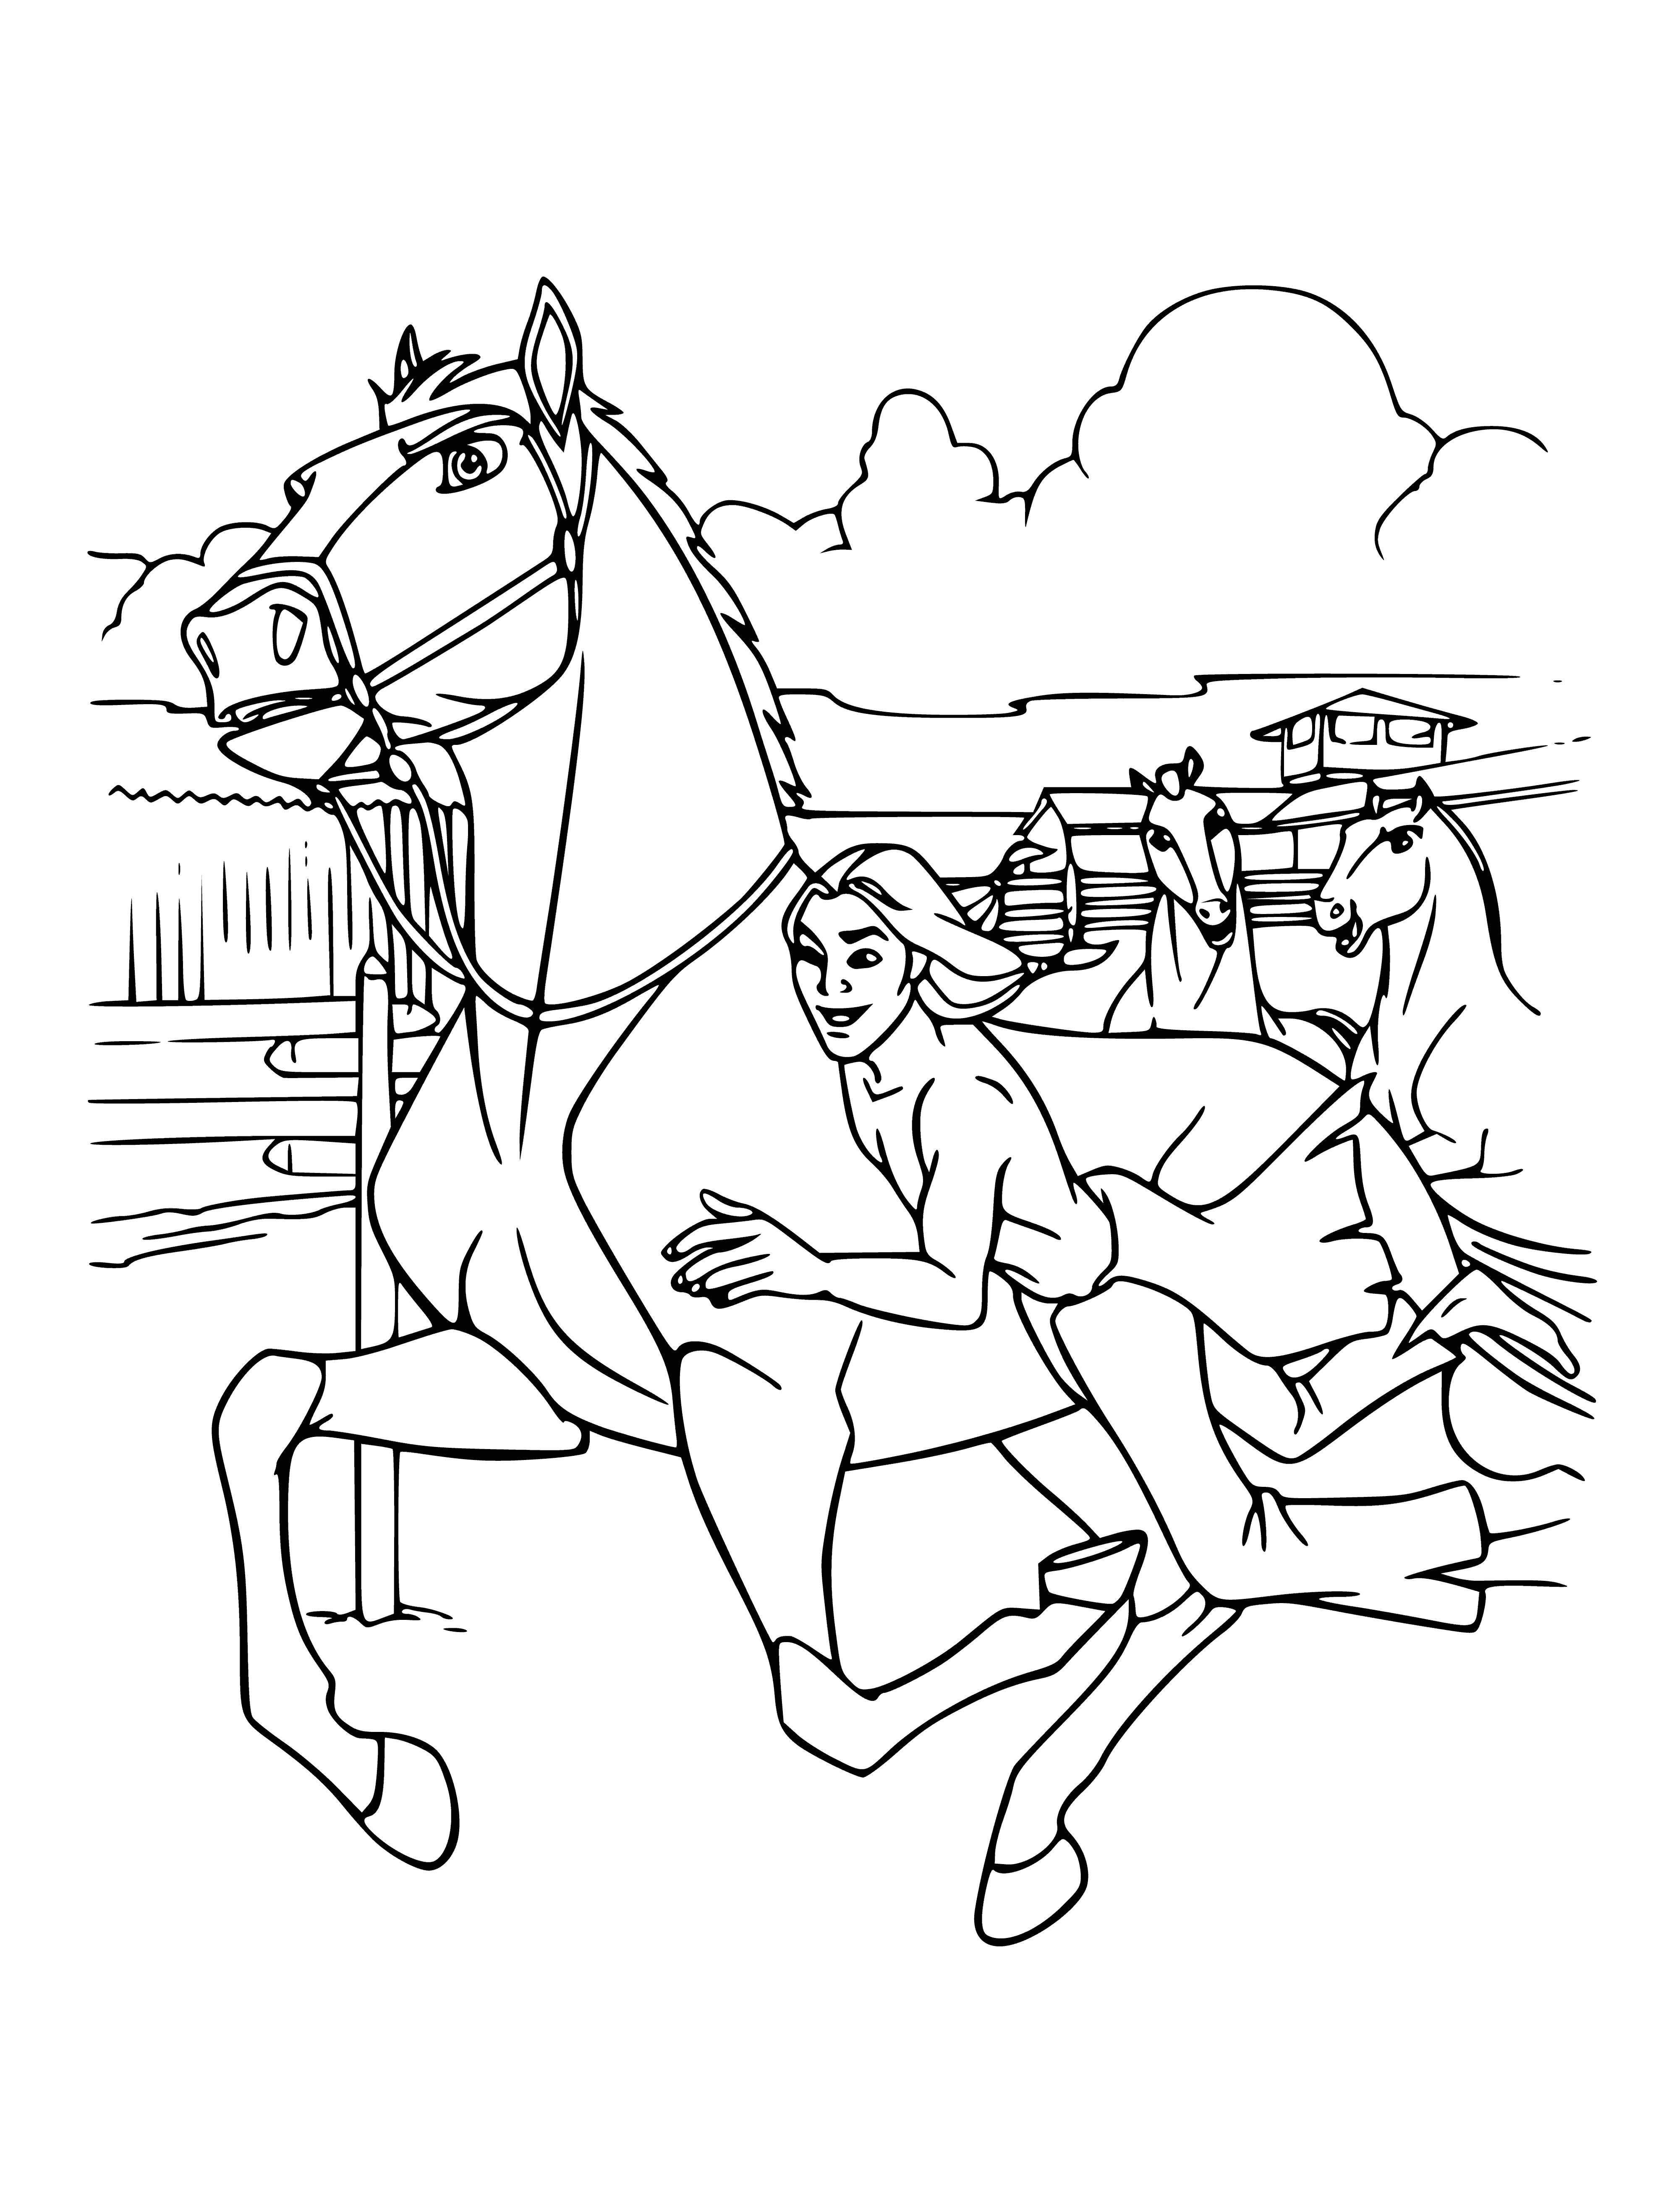 Salvation from captivity coloring page